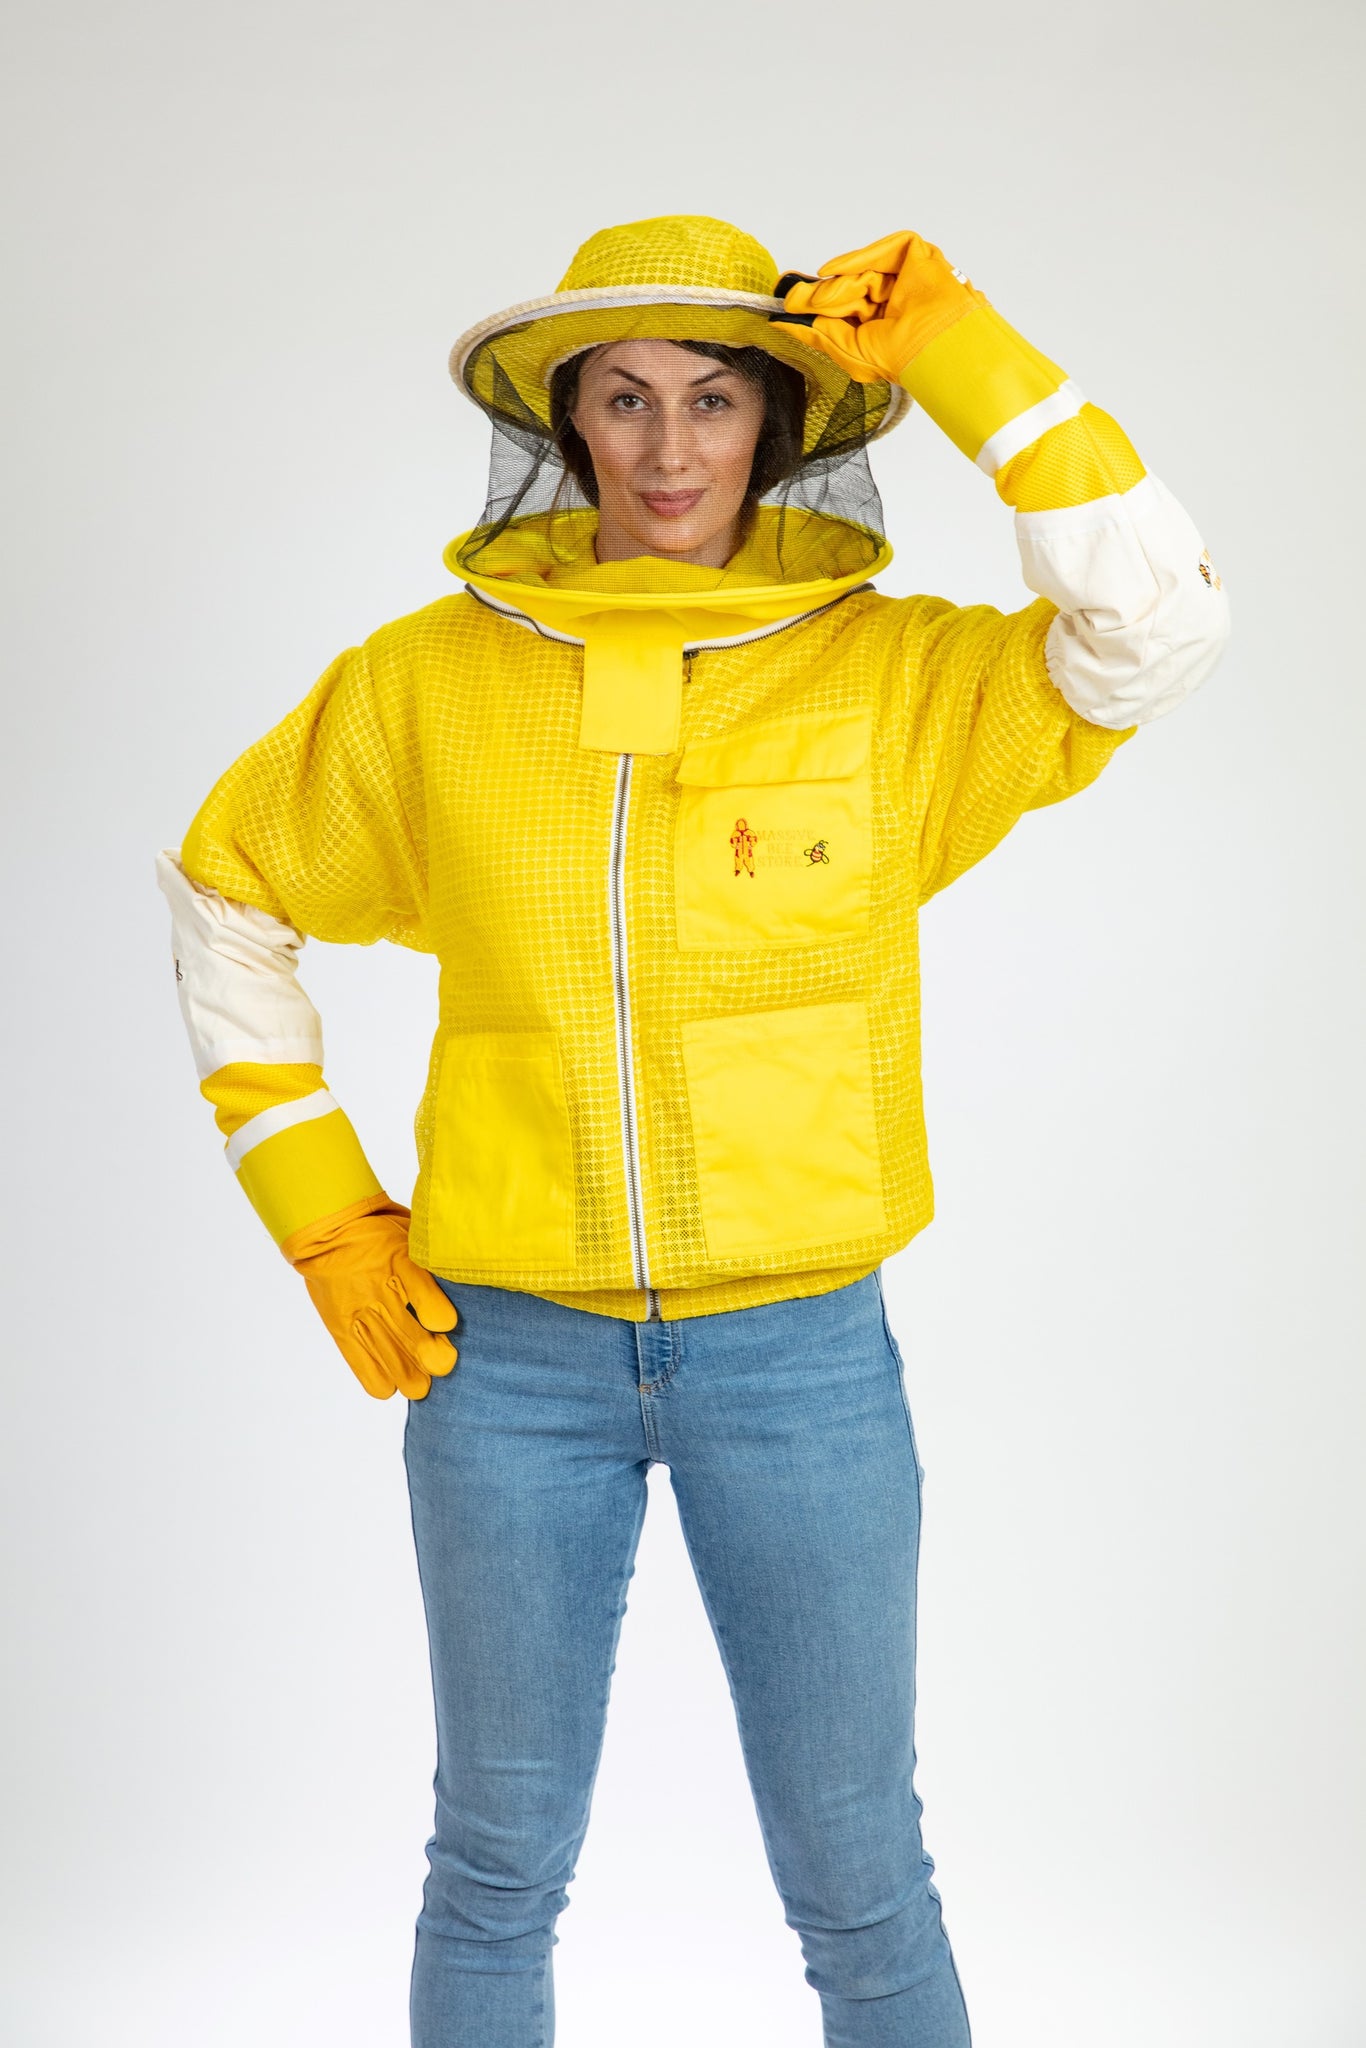 Yellow Beekeeping Ventilated Jacket with Round Veil